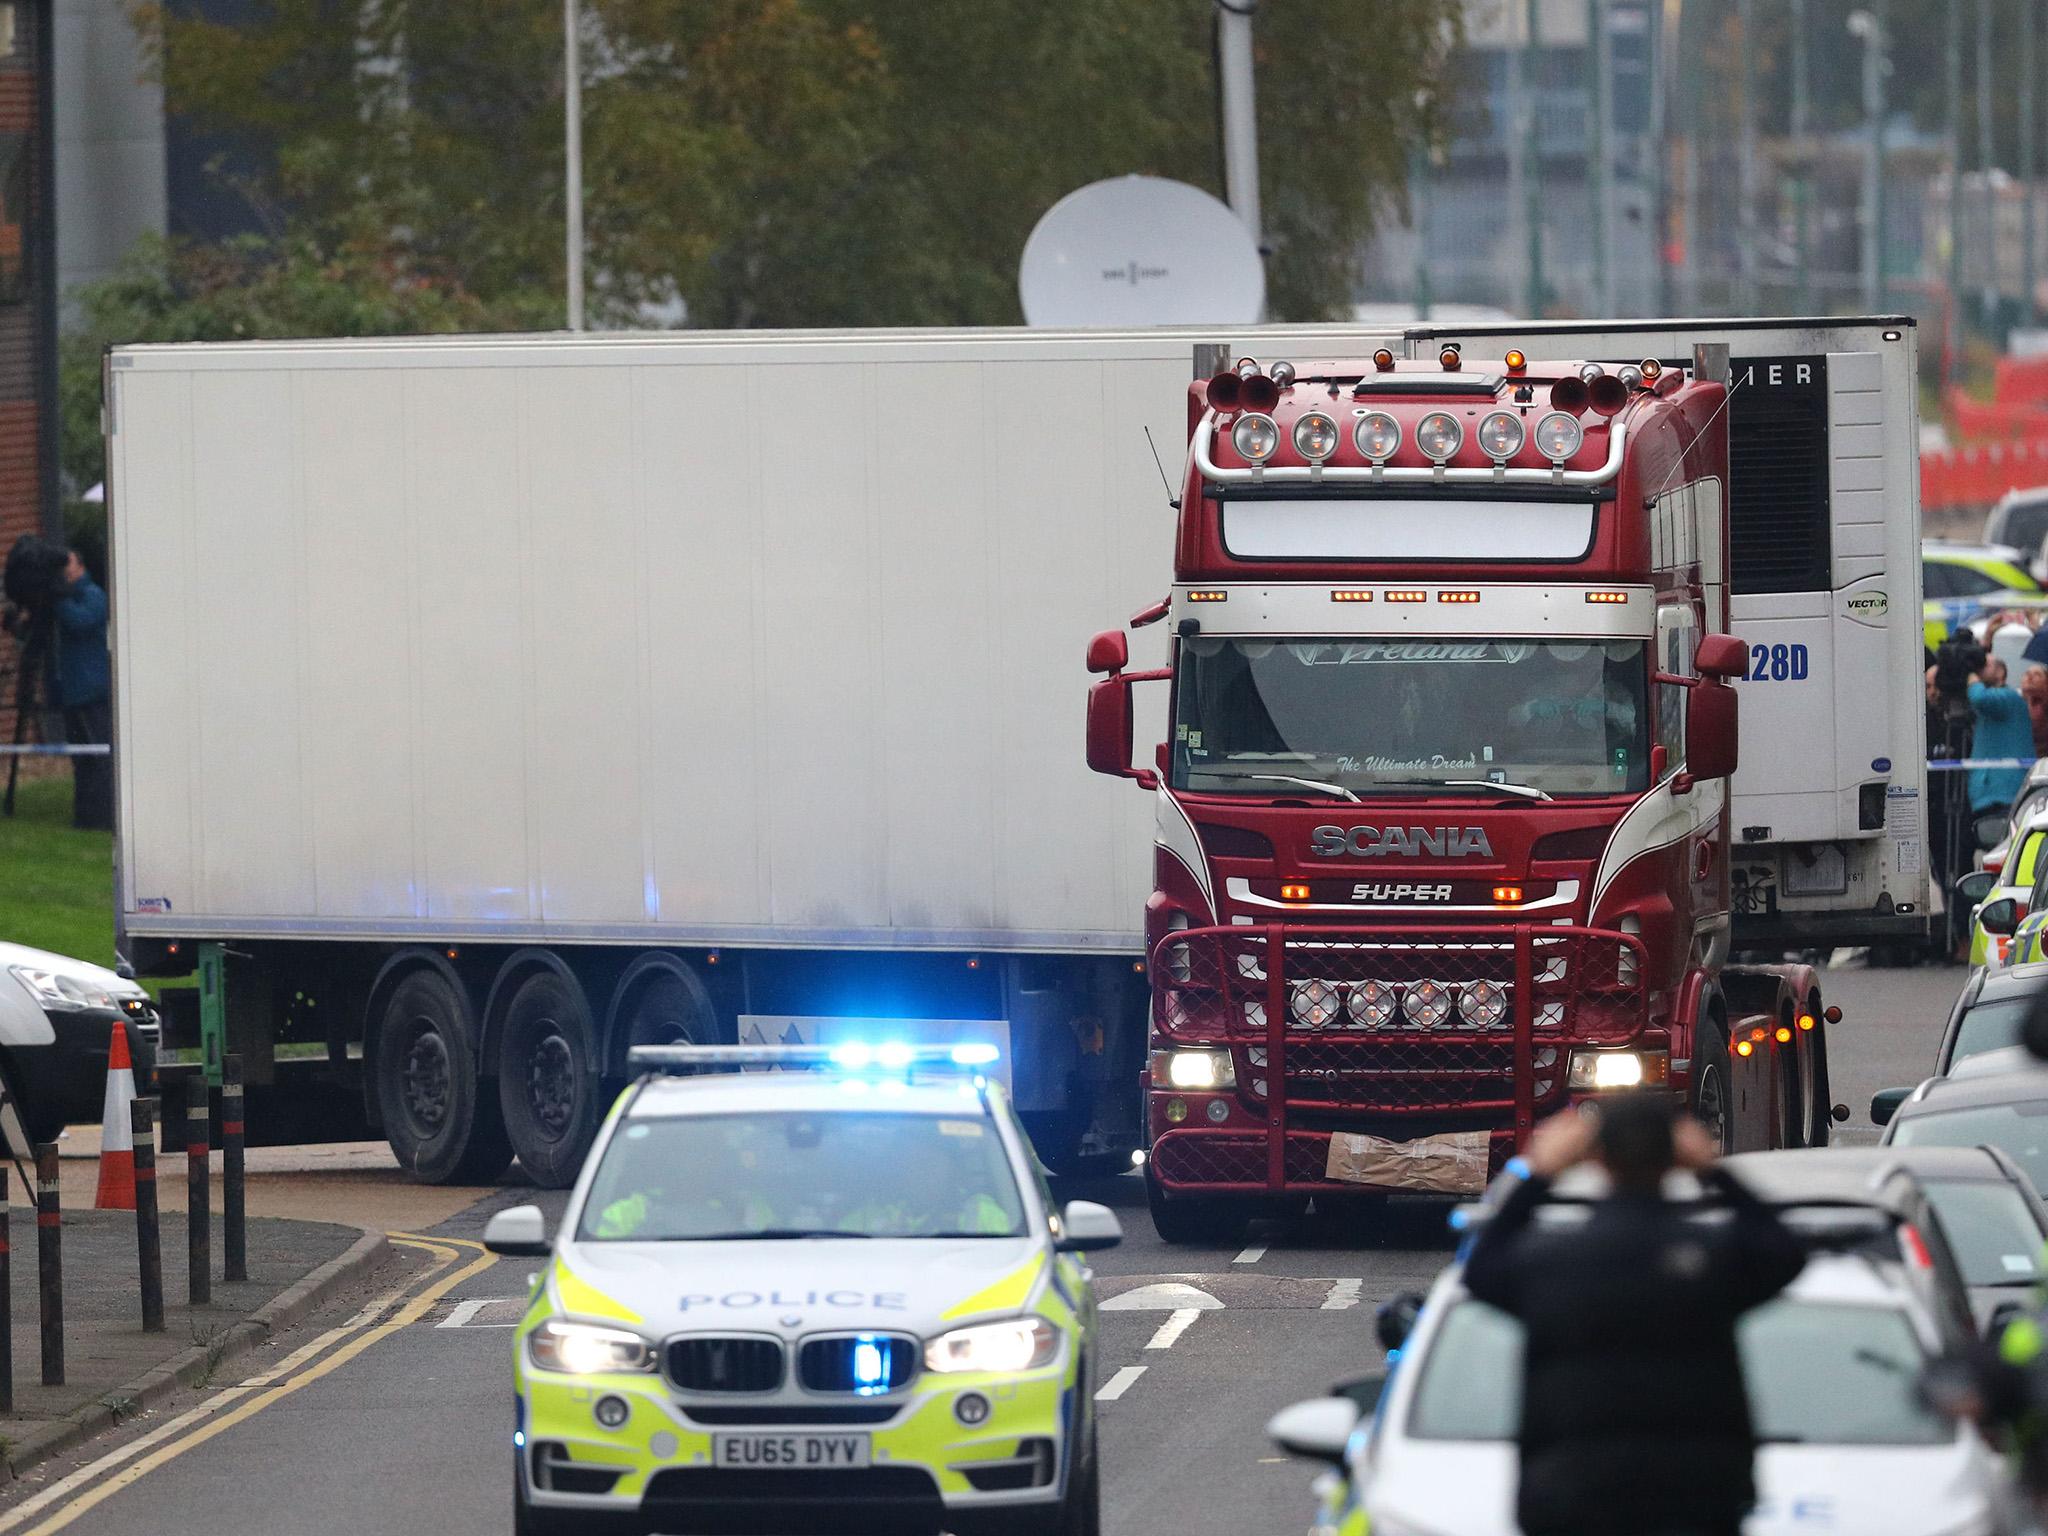 The bodies of 39 Vietnamese migrants were found in the back of a lorry in Grays, Essex on 23 October